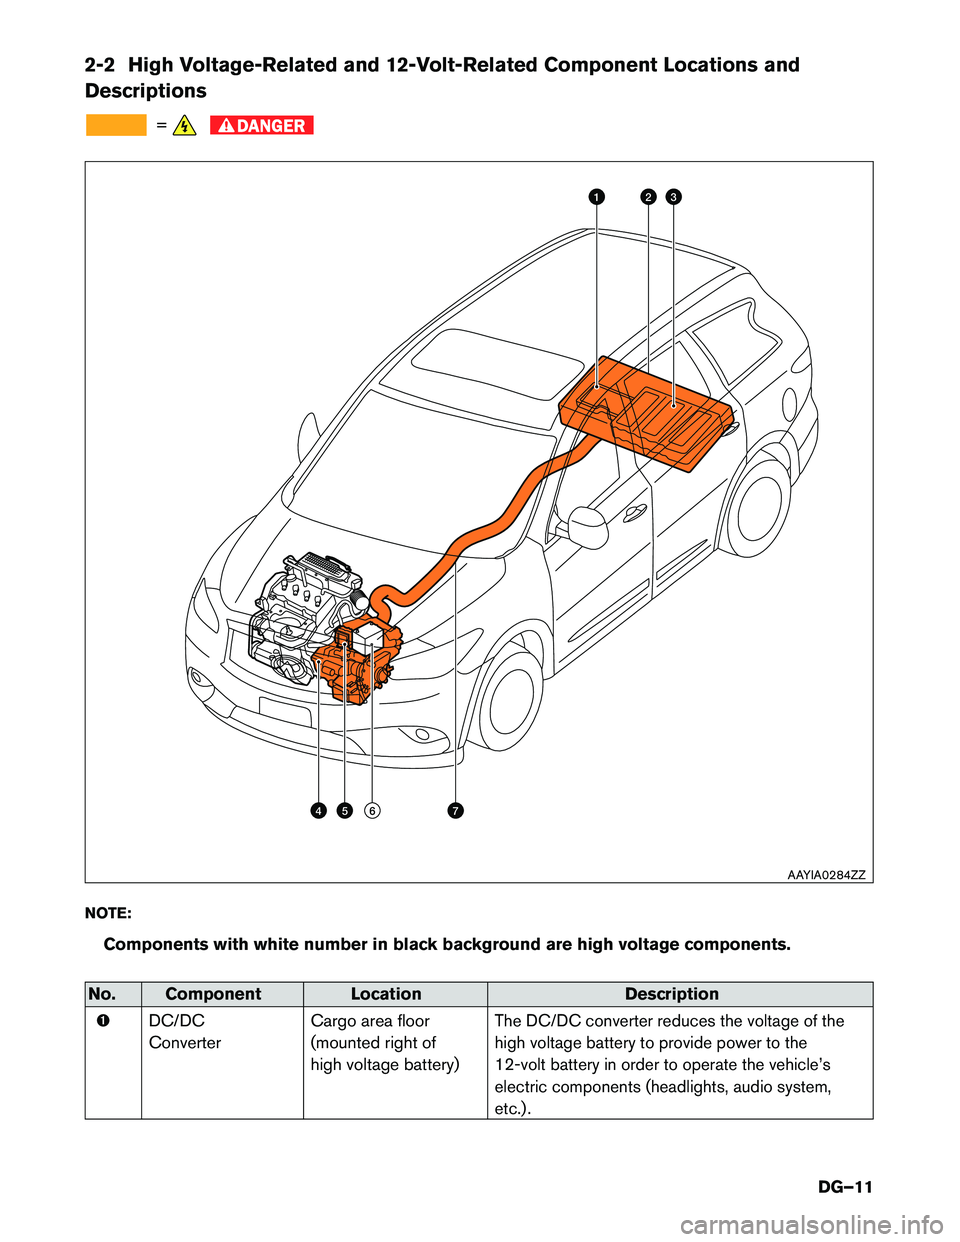 INFINITI QX60 HYBRID 2015  Dismantling Guide 2-2 High Voltage-Related and 12-Volt-Related Component Locations and Descriptions
=DANGER
NOTE:Components with white number in black background are high voltage components.
No. Component Location Desc